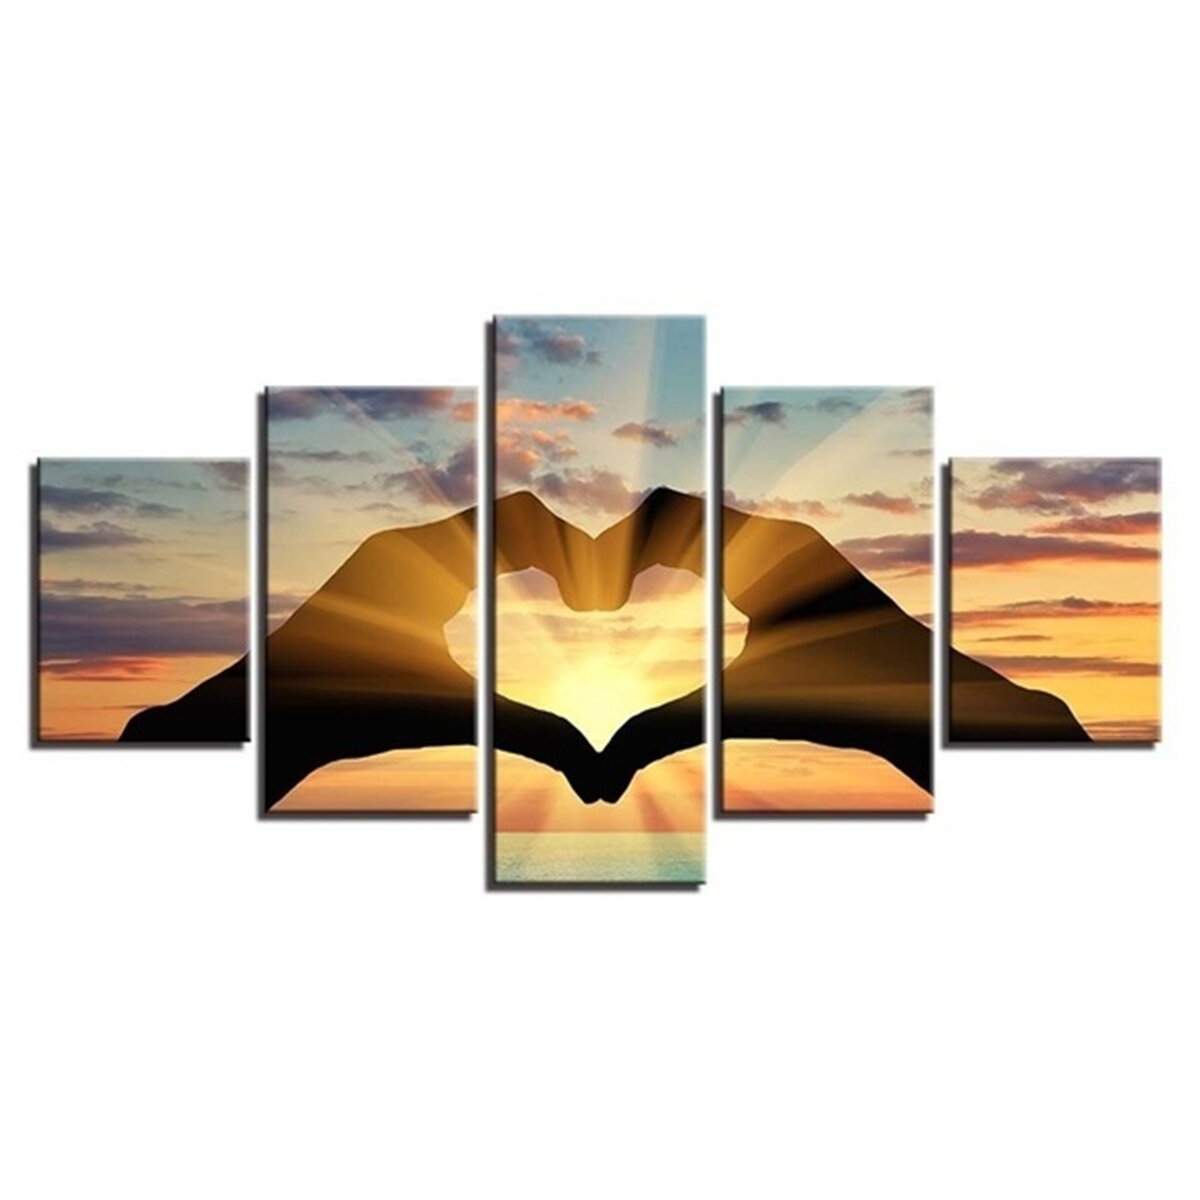 

5 Pcs Wall Decorative Painting Couple Love Group Wall Decor Art Pictures Canvas Prints Home Office Hotel Decorations